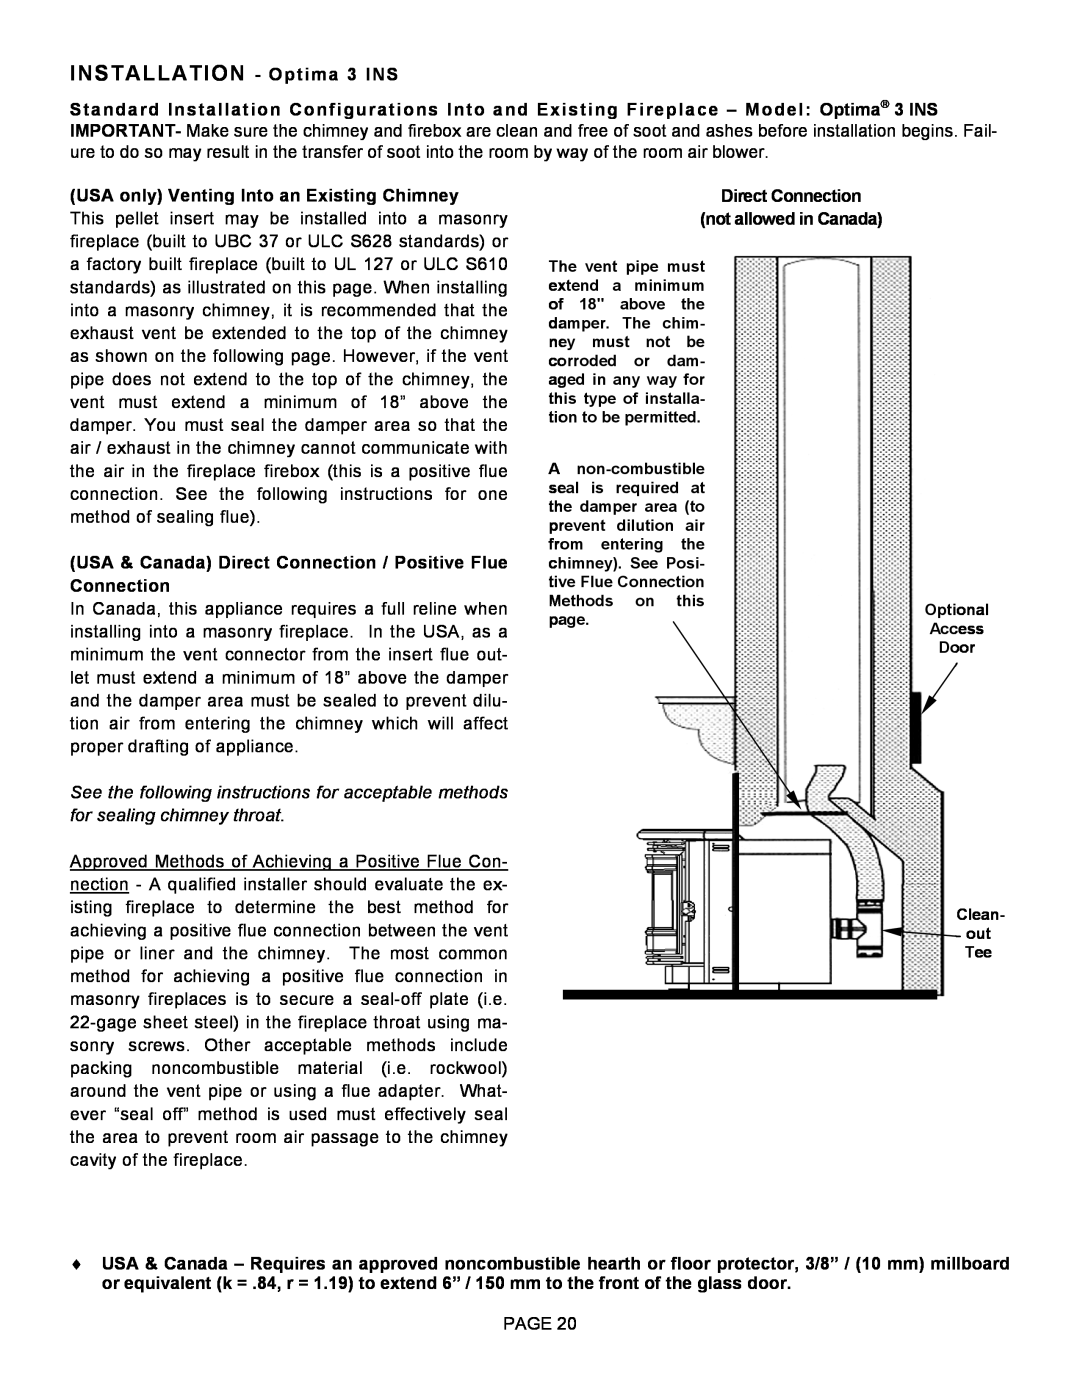 Lenoxx Electronics Optima 3 FS operation manual INSTALLATION - Optima 3 INS, USA only Venting Into an Existing Chimney 